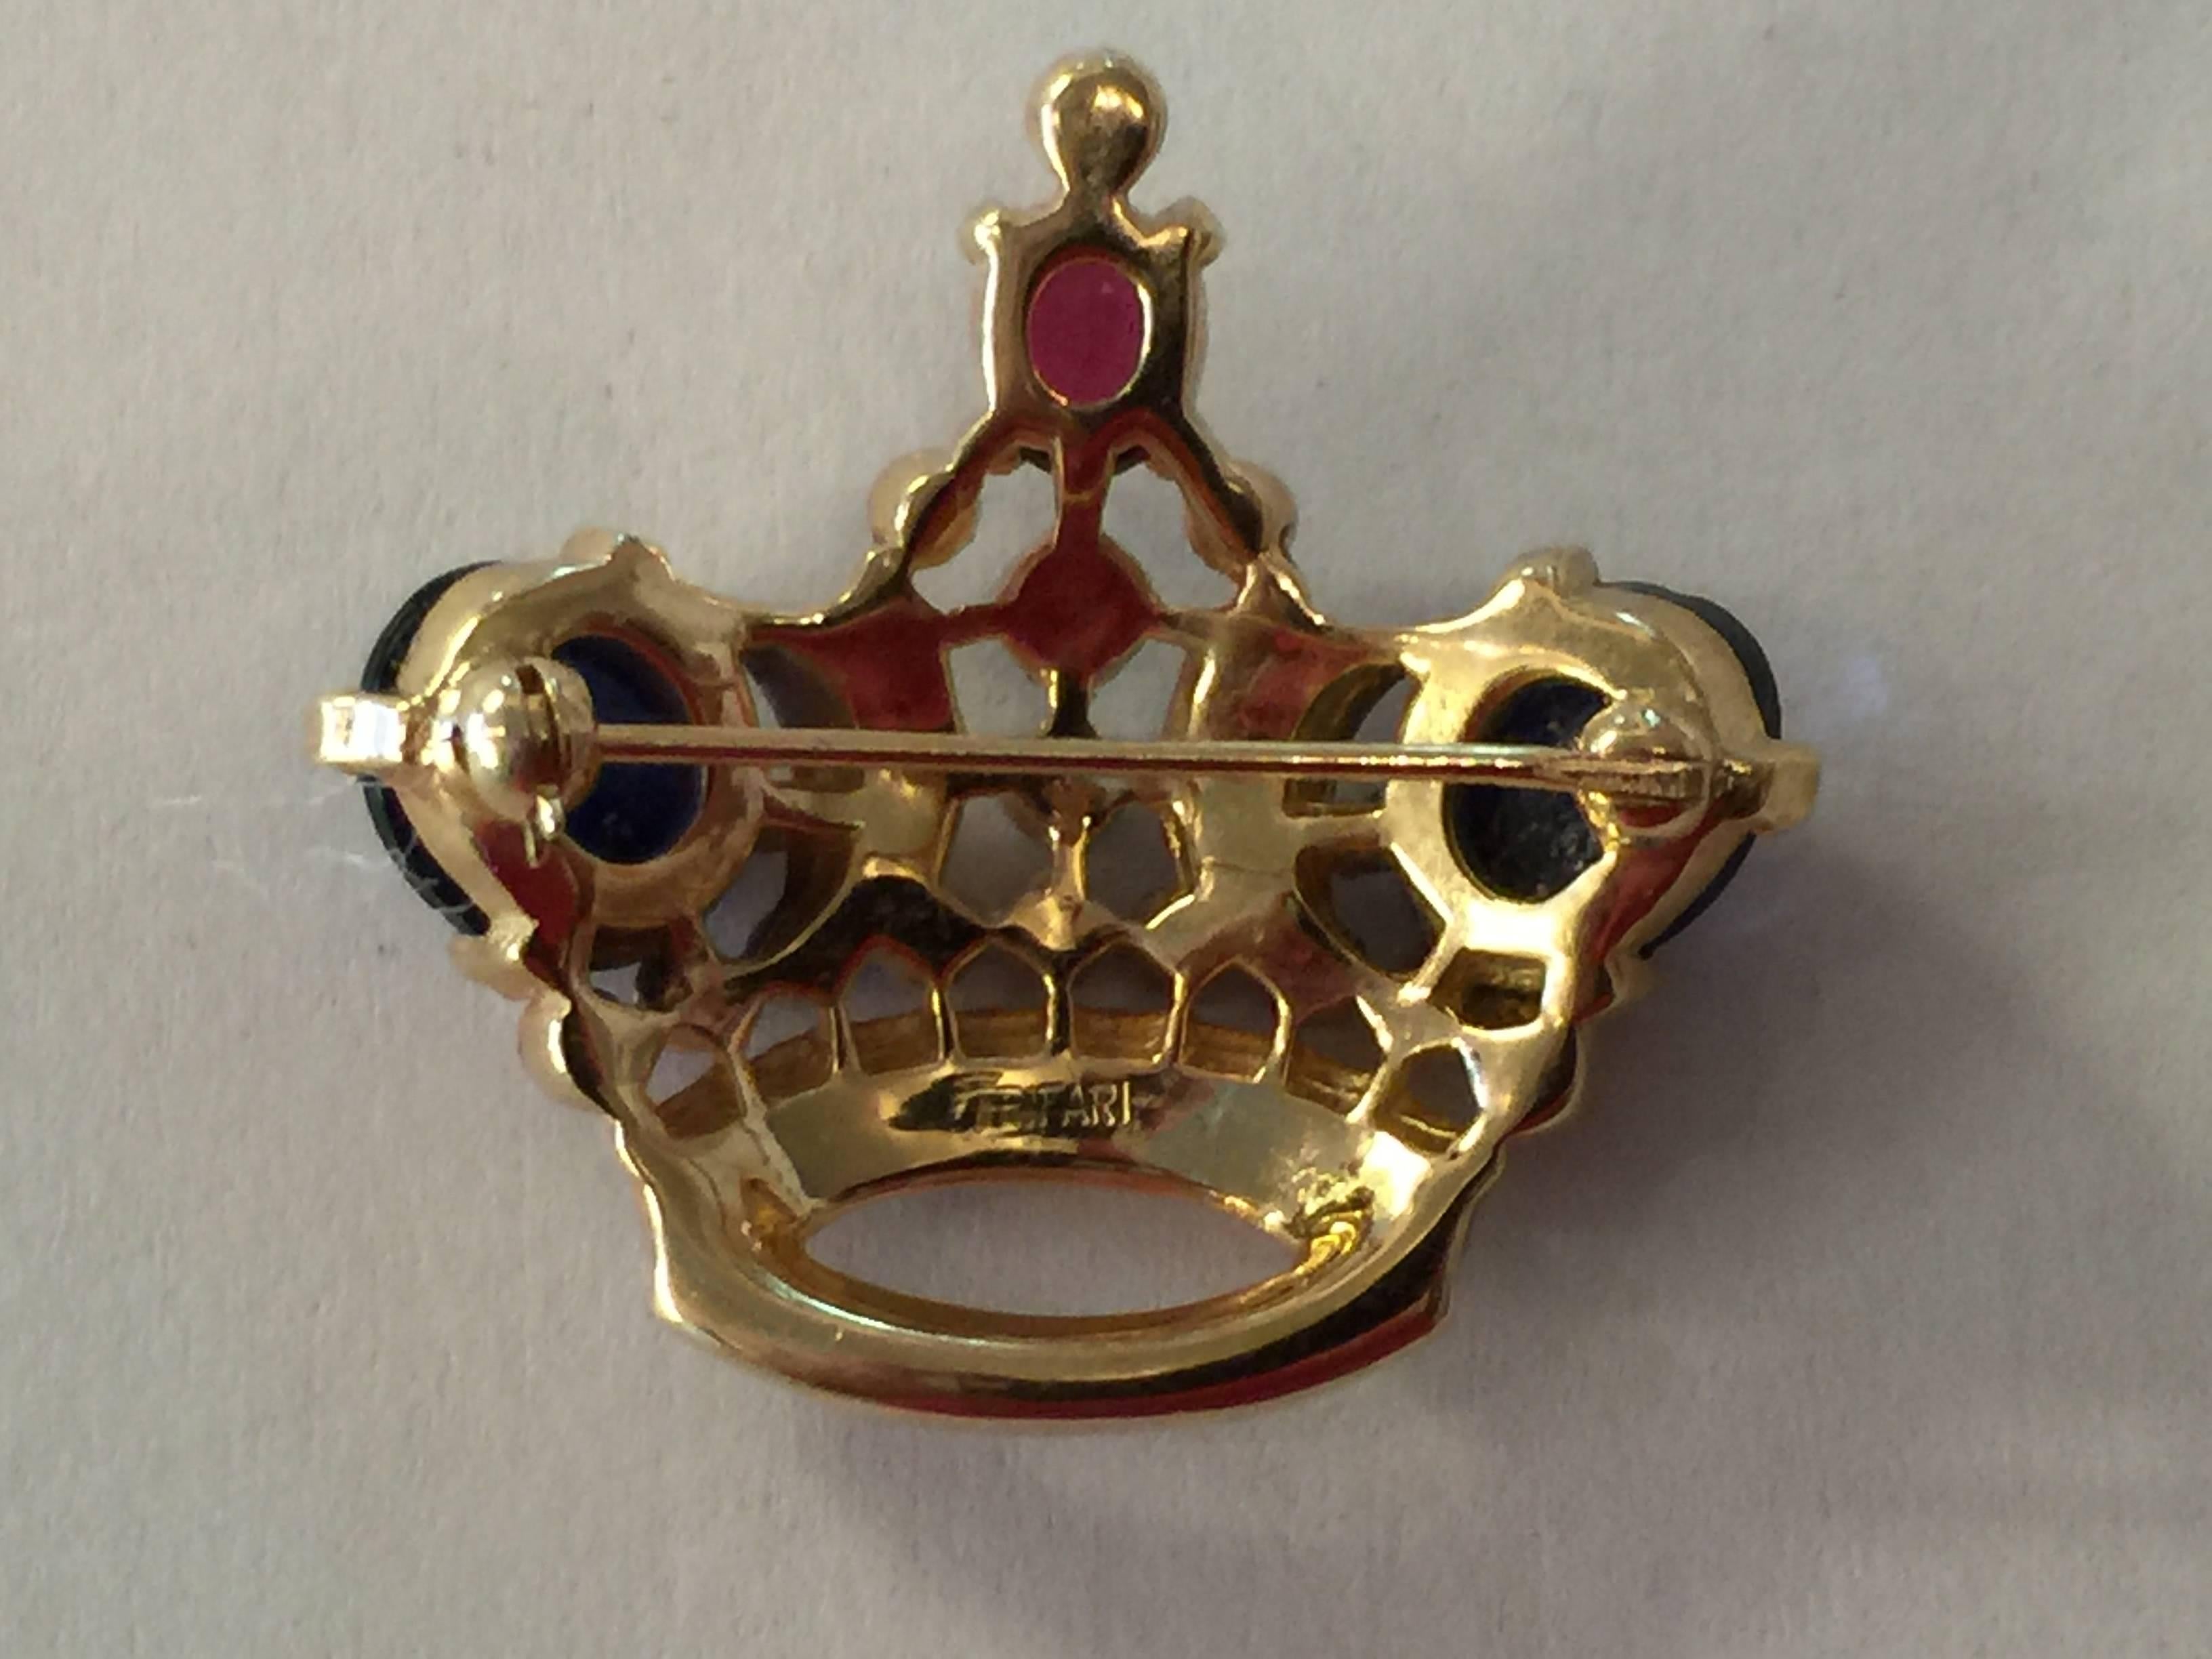 Possibly the most well know brooch made by TRIFARI, this crown pin brooch is done in the small size and is perfect and pristine, constructed of dazzling large and small multi colored cabochons, ovals and round stones. Approximately 1